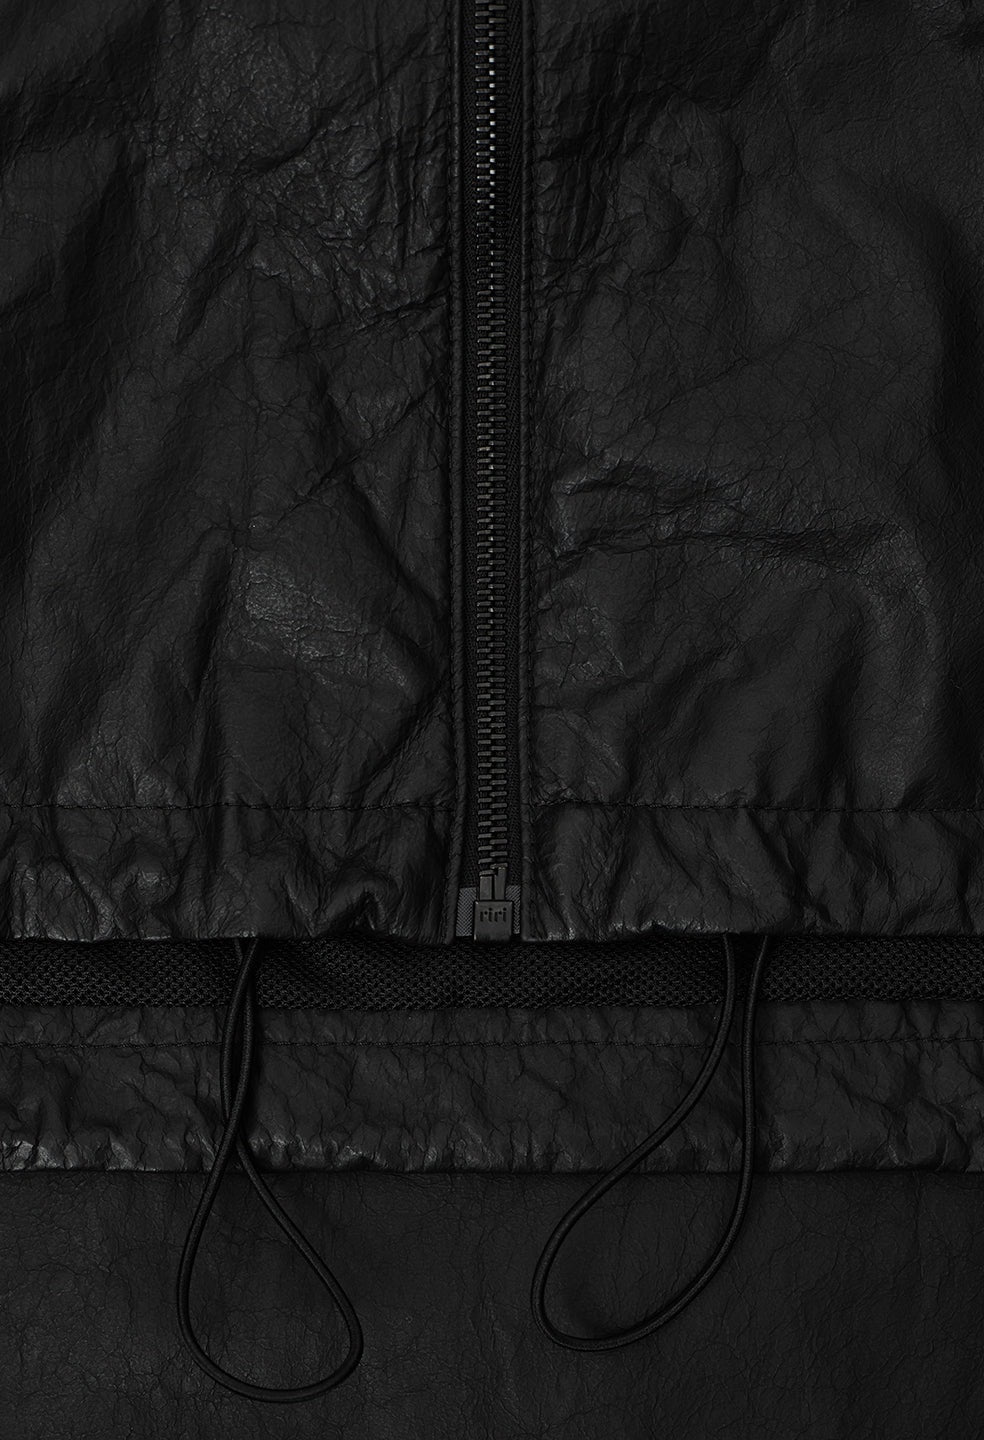 LETHER ANORAK